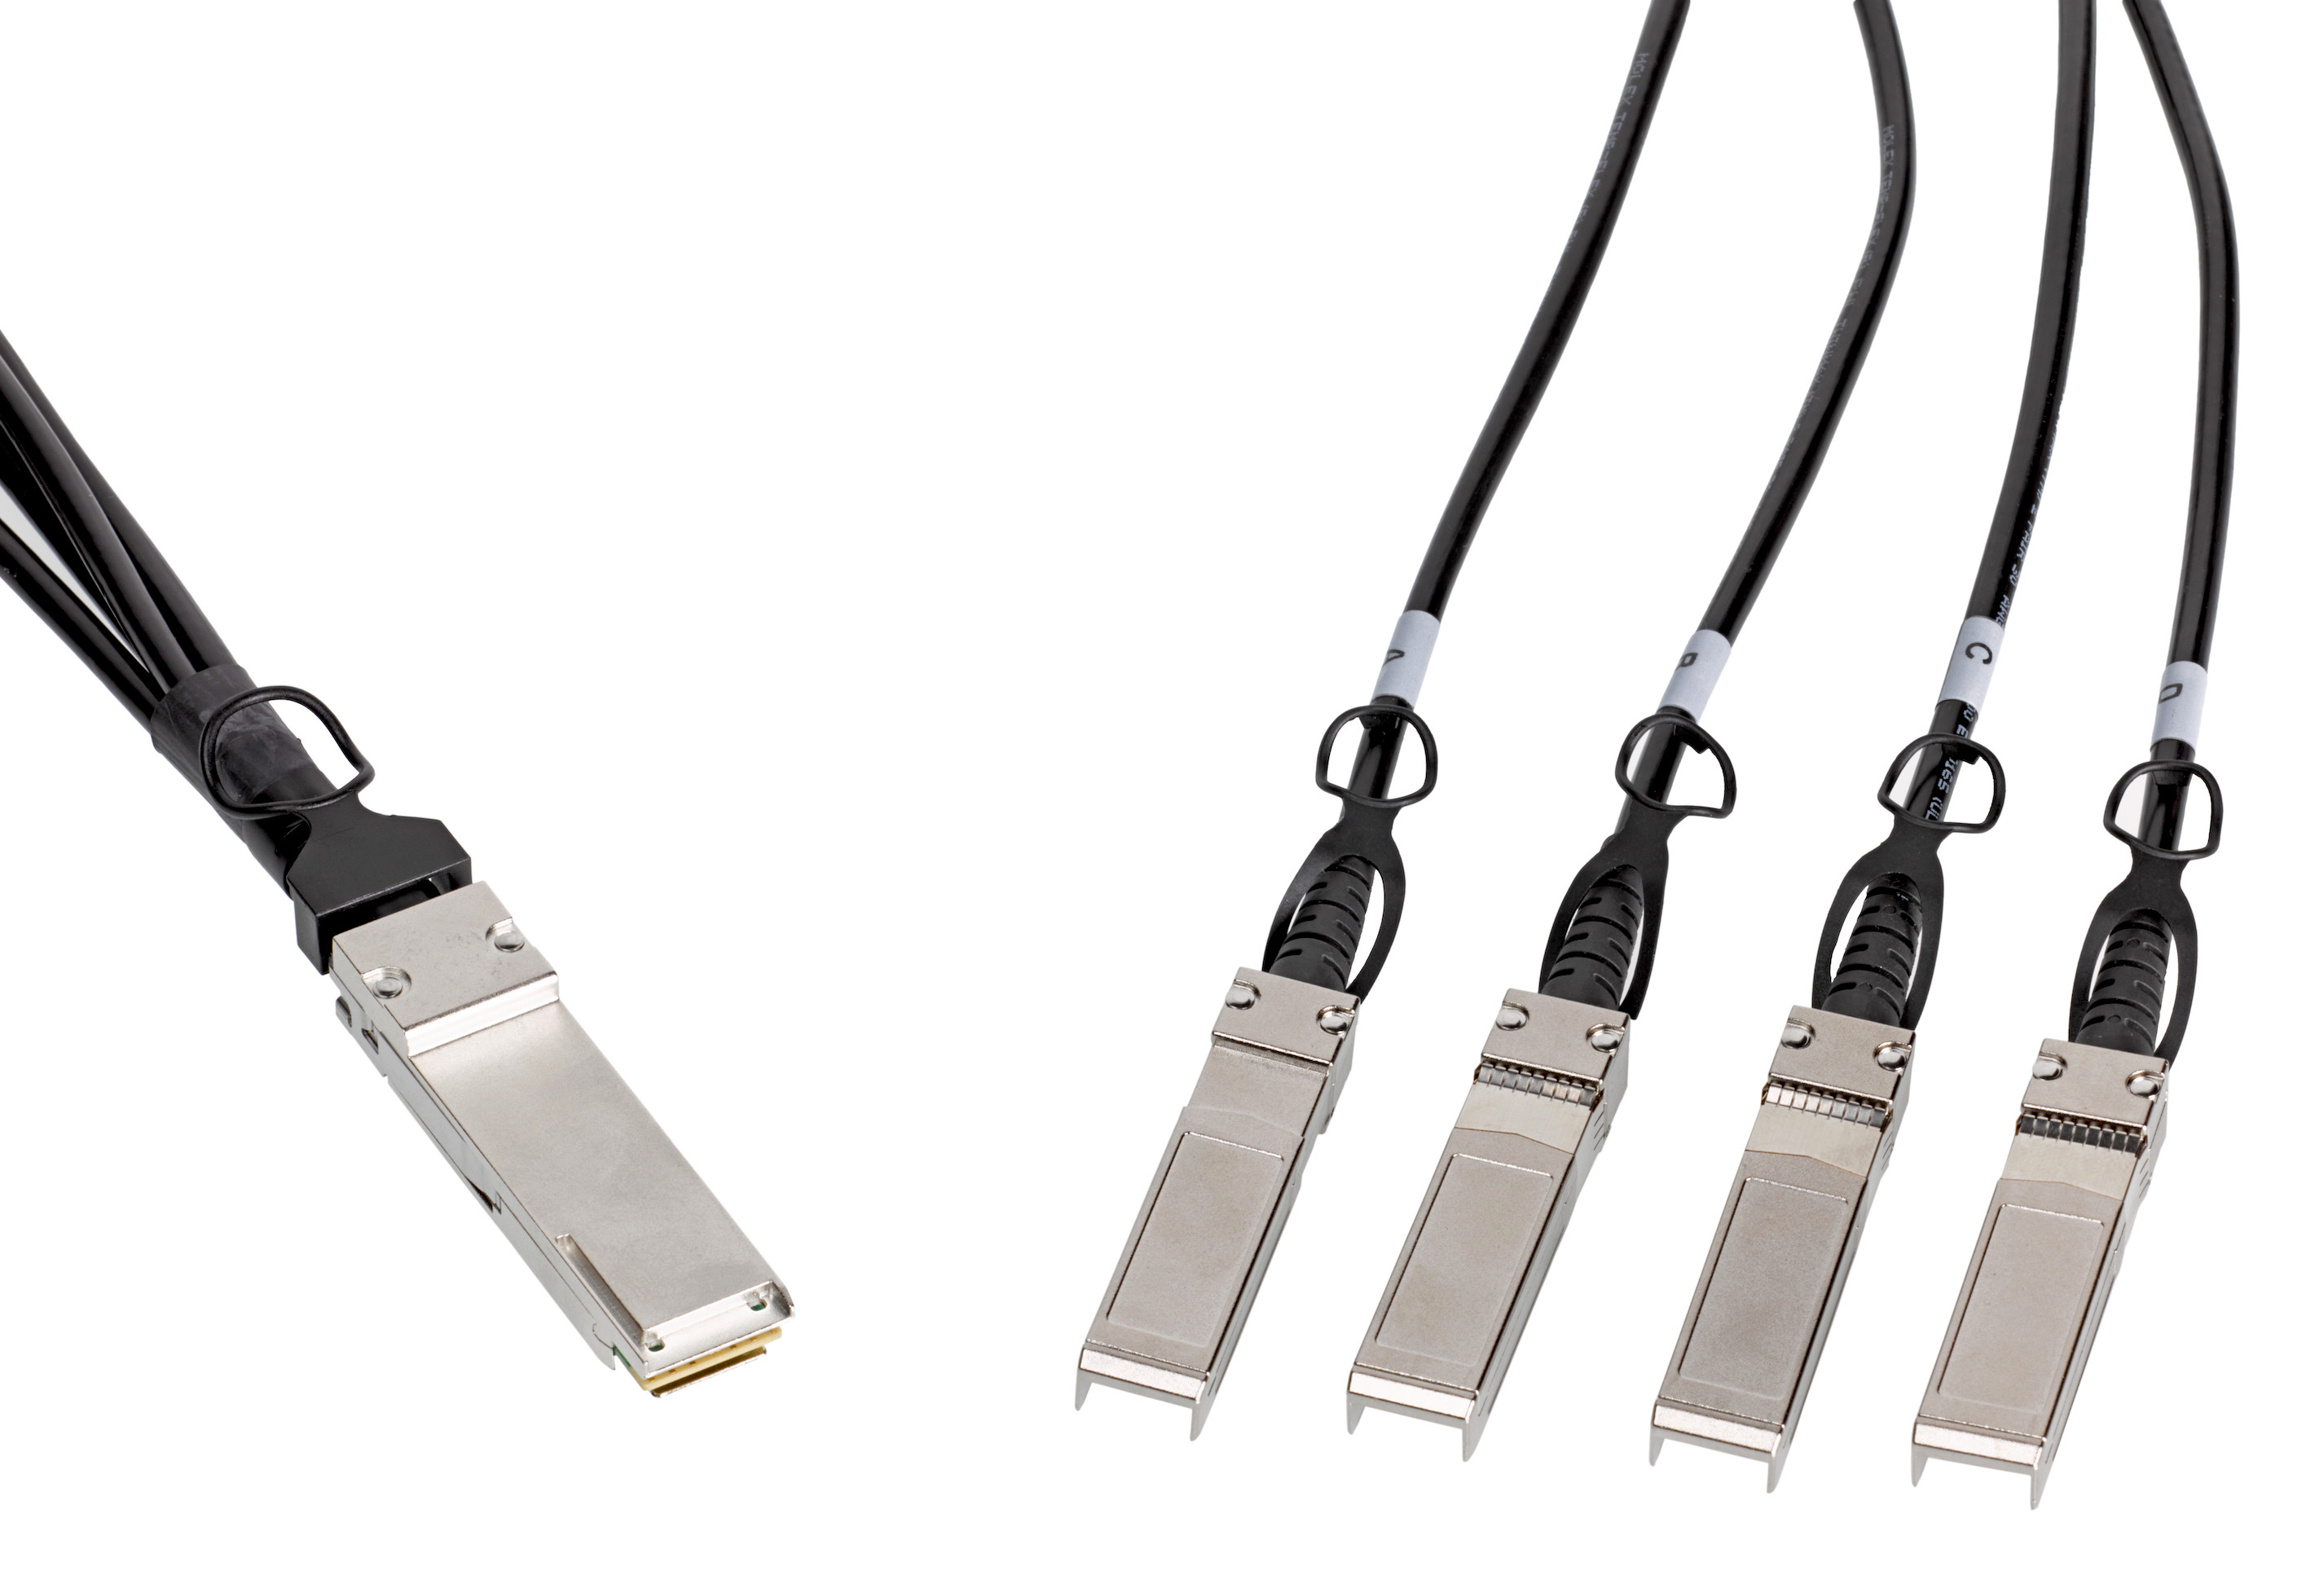 High-Speed Connector and Cable Products: Arrow stocks Molex’s zQSFP+ and QSFP+ Interconnect Systems